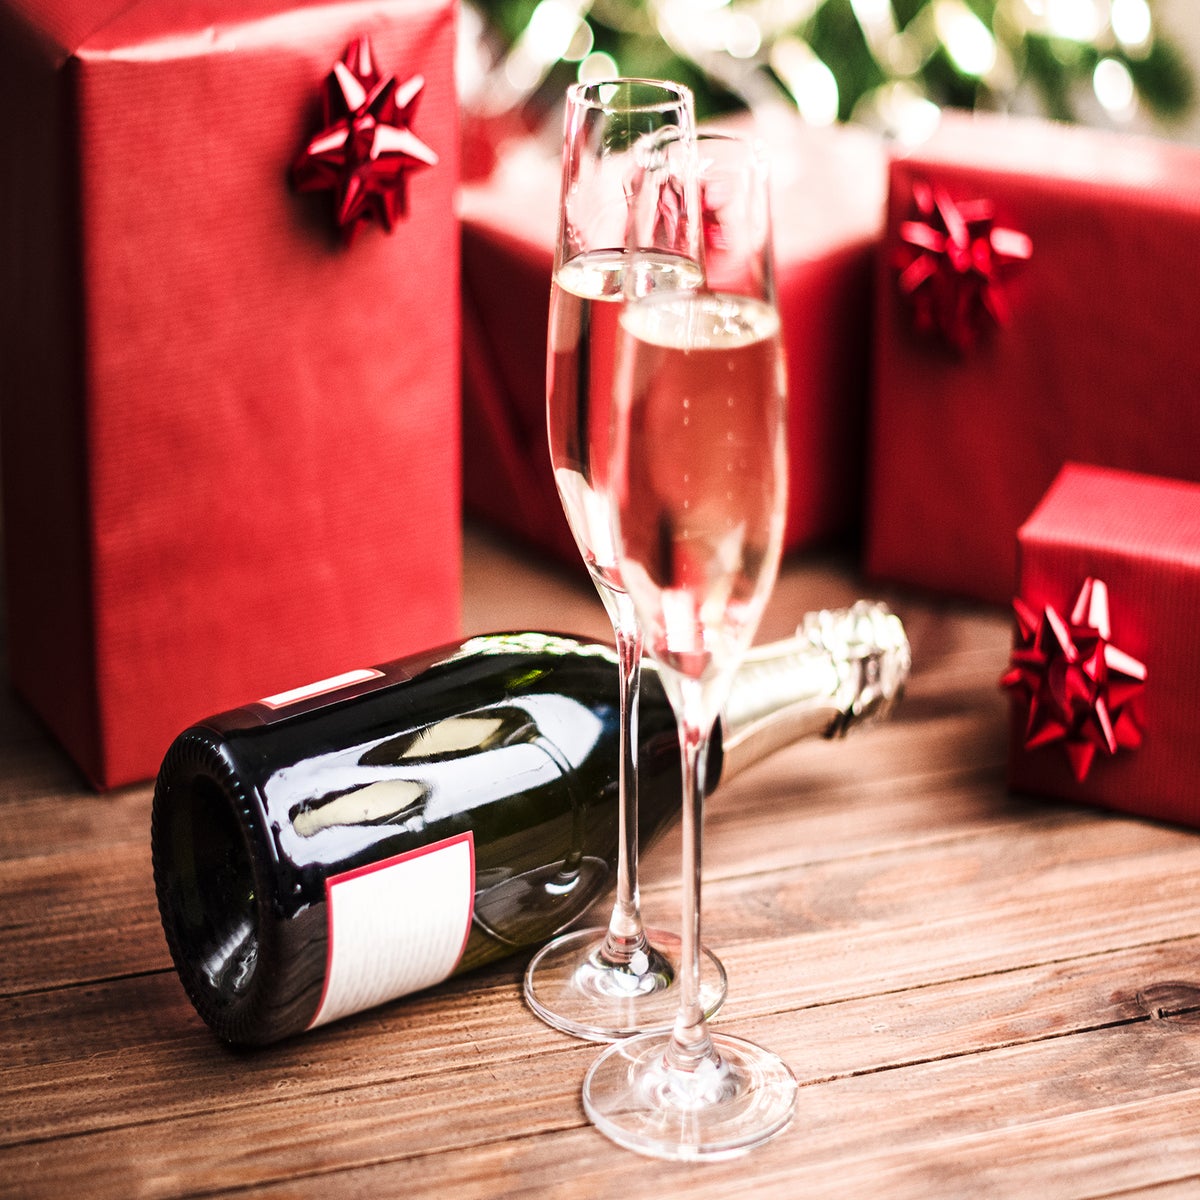 https://static.independent.co.uk/s3fs-public/thumbnails/image/2017/11/30/12/wine-christmas-gift.jpg?width=1200&height=1200&fit=crop